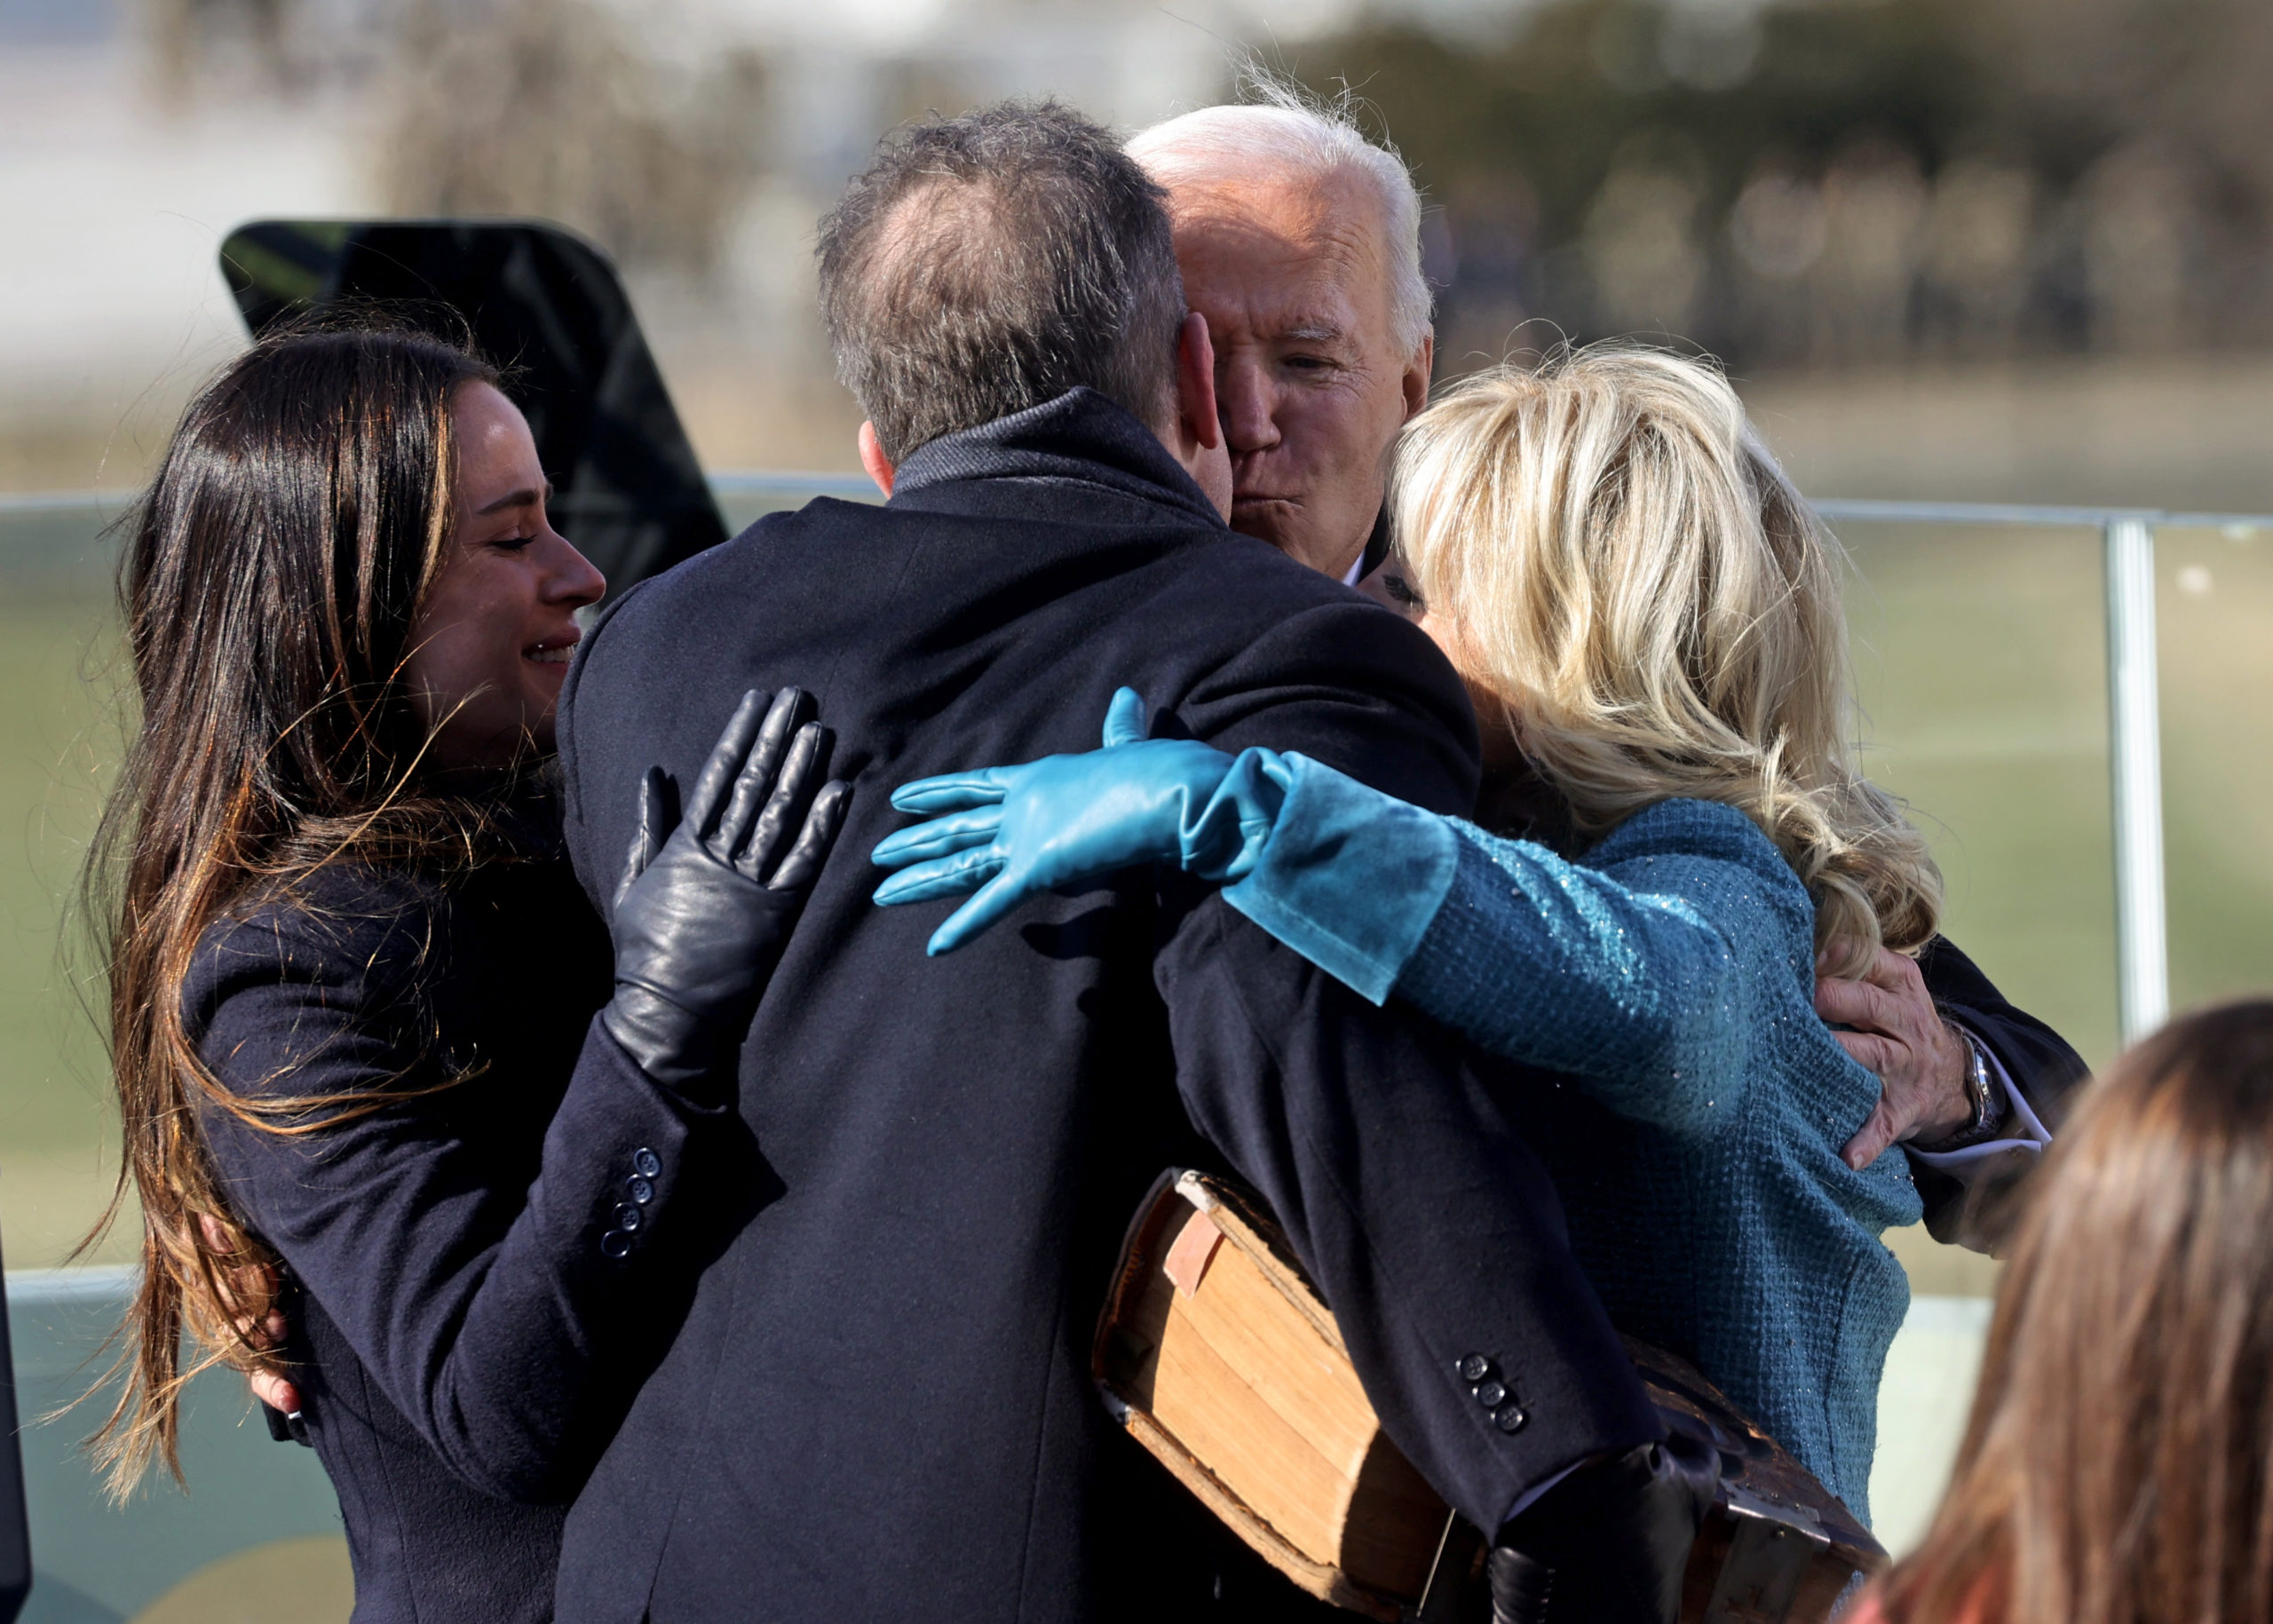 President Joe Biden embraces his family after being sworn in during his inauguration on the West Front of the U.S. Capitol on January 20, 2021 in Washington, DC. During today's inauguration ceremony Biden becomes the 46th President of the United States. (Photo by Jonathan Ernst-Pool/Getty Images)